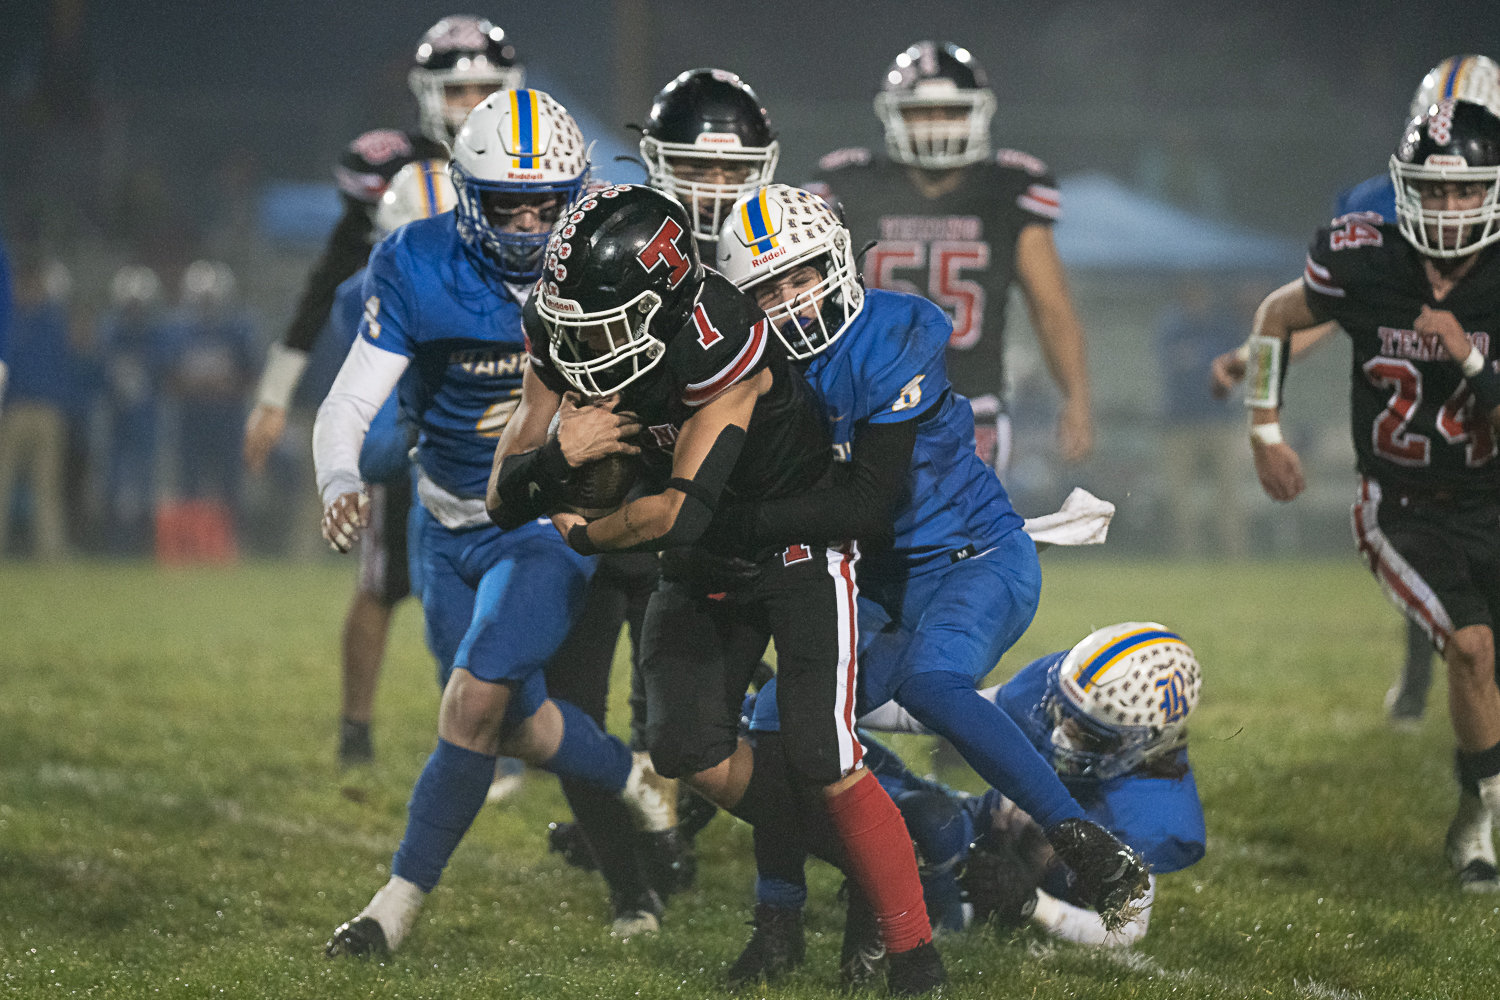 Tenino's Kysen Knox fights through contact against Rochester in the Scatter Creek Showdown Oct. 28.